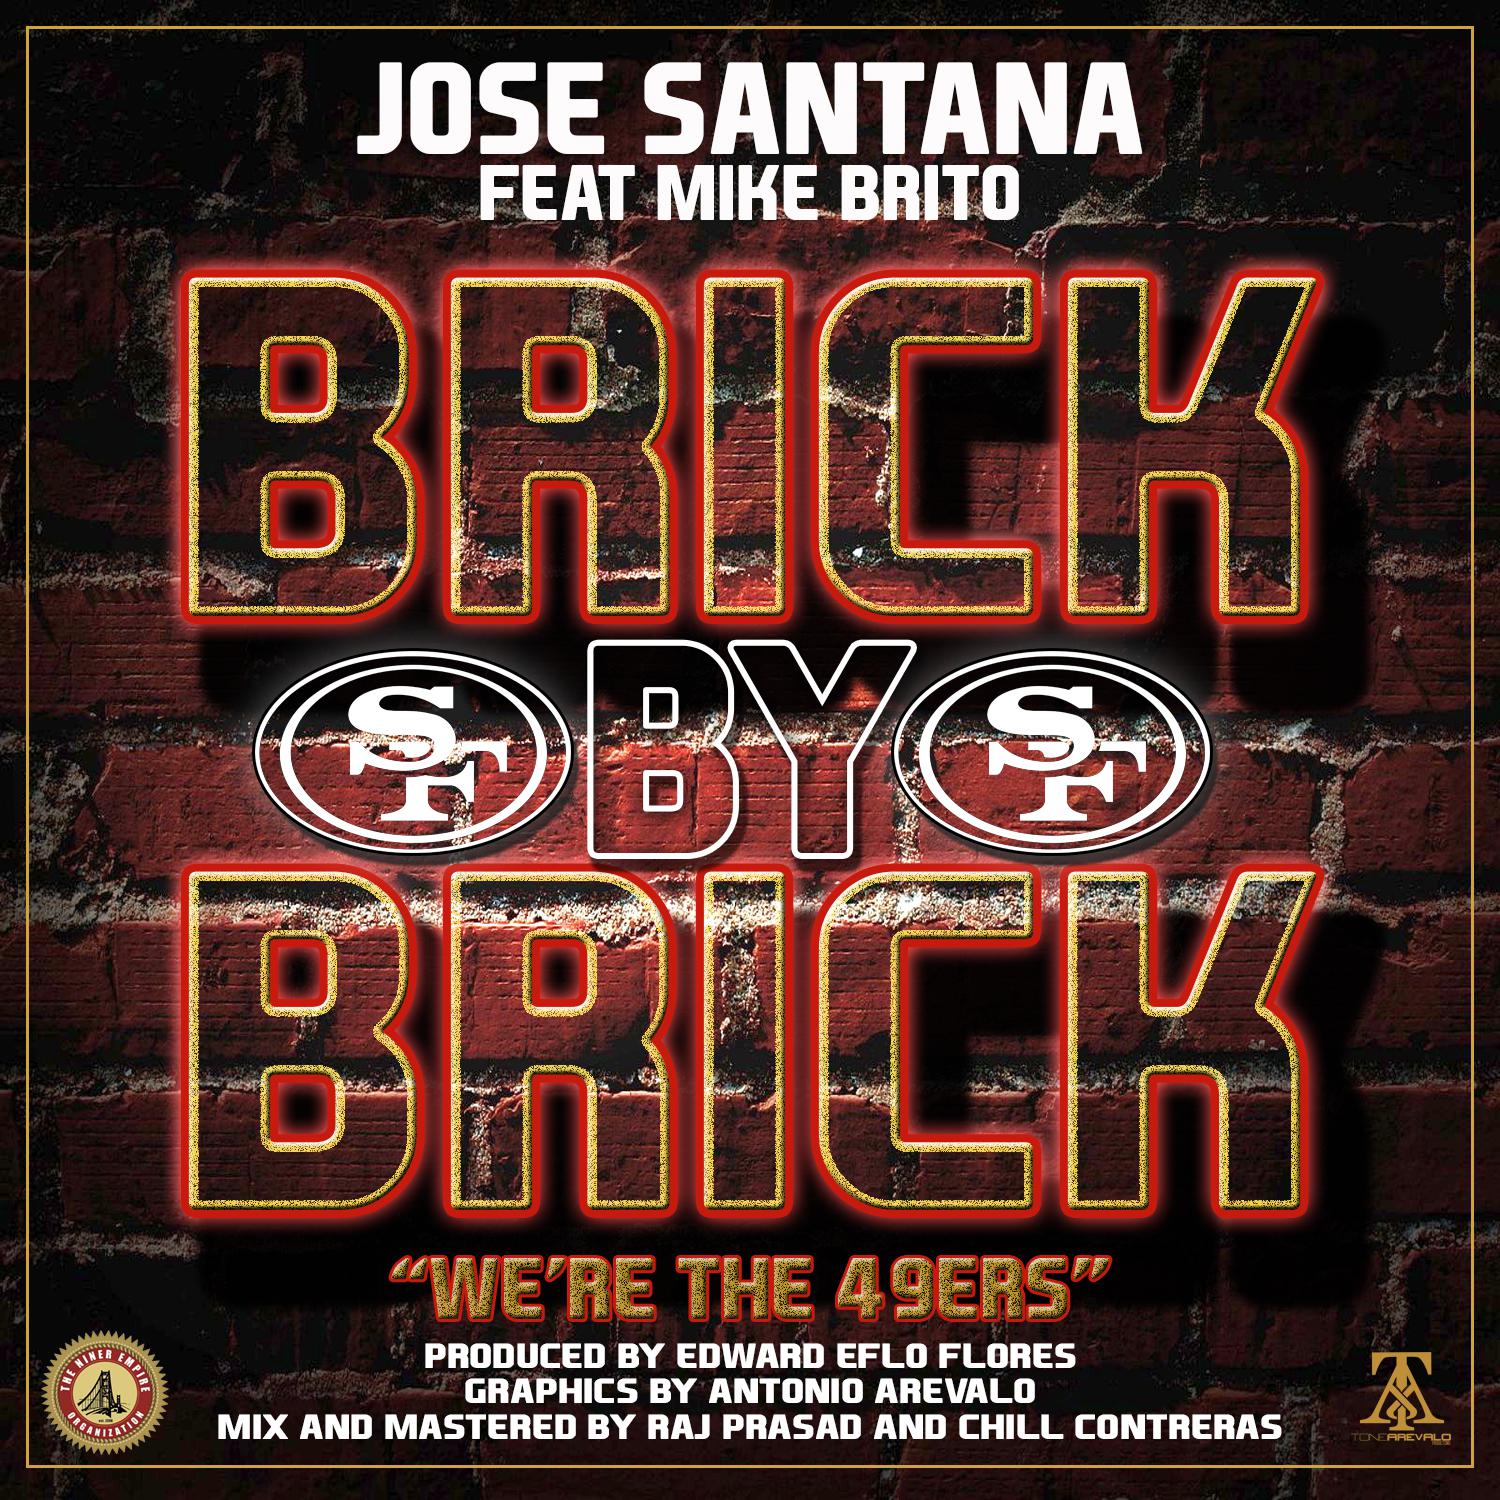 Brick By Brick: We're the 49ers (feat. Mike Brito)